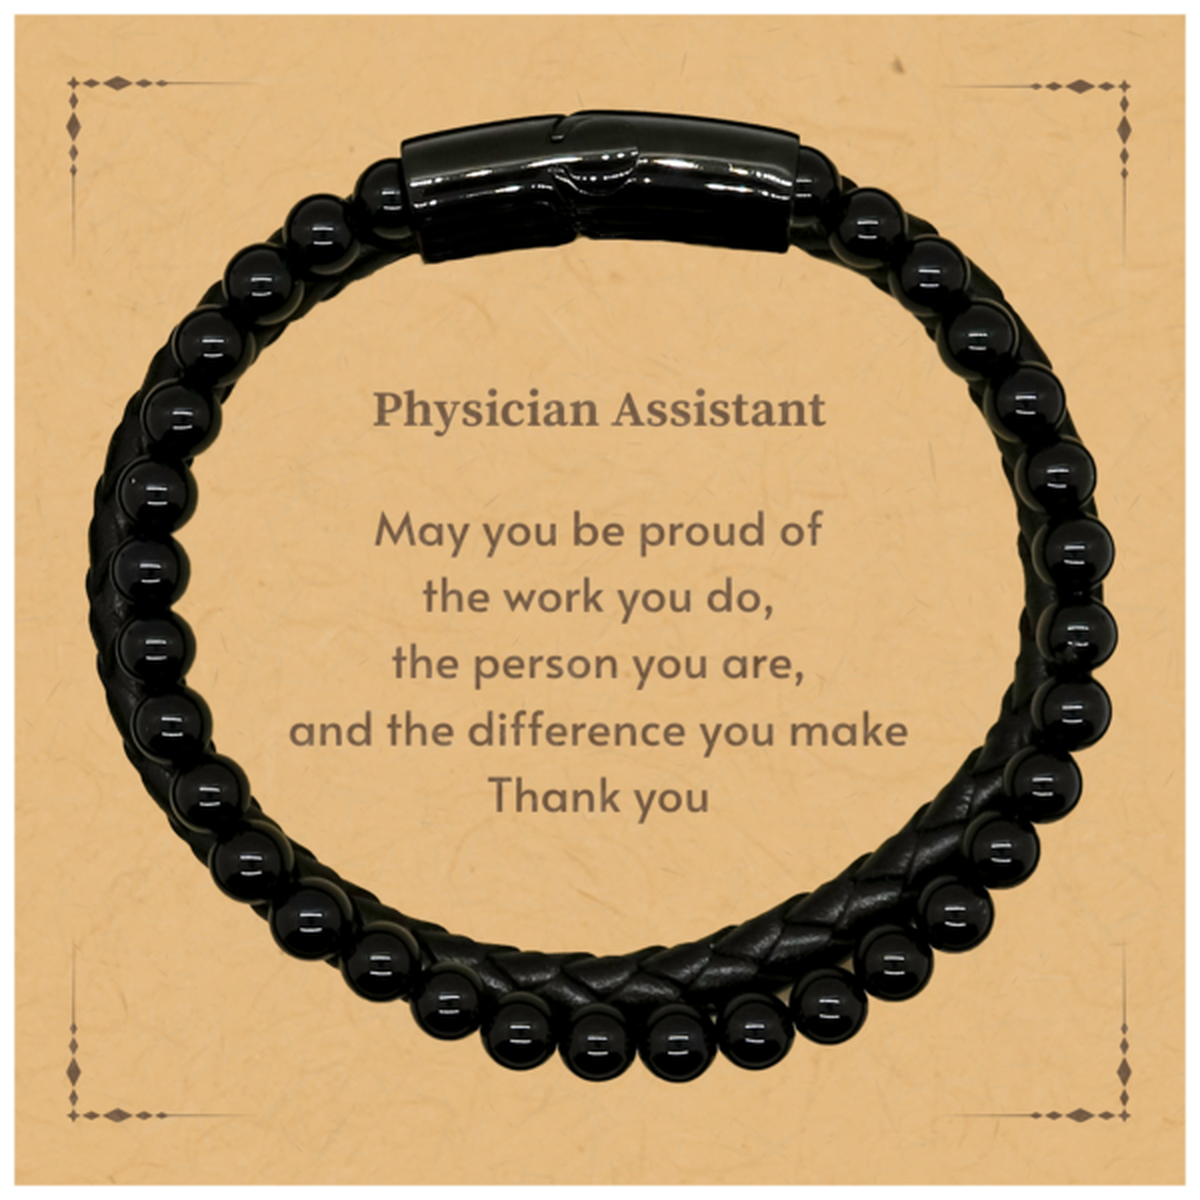 Heartwarming Stone Leather Bracelets Retirement Coworkers Gifts for Physician Assistant, Physician Assistant May You be proud of the work you do, the person you are Gifts for Boss Men Women Friends